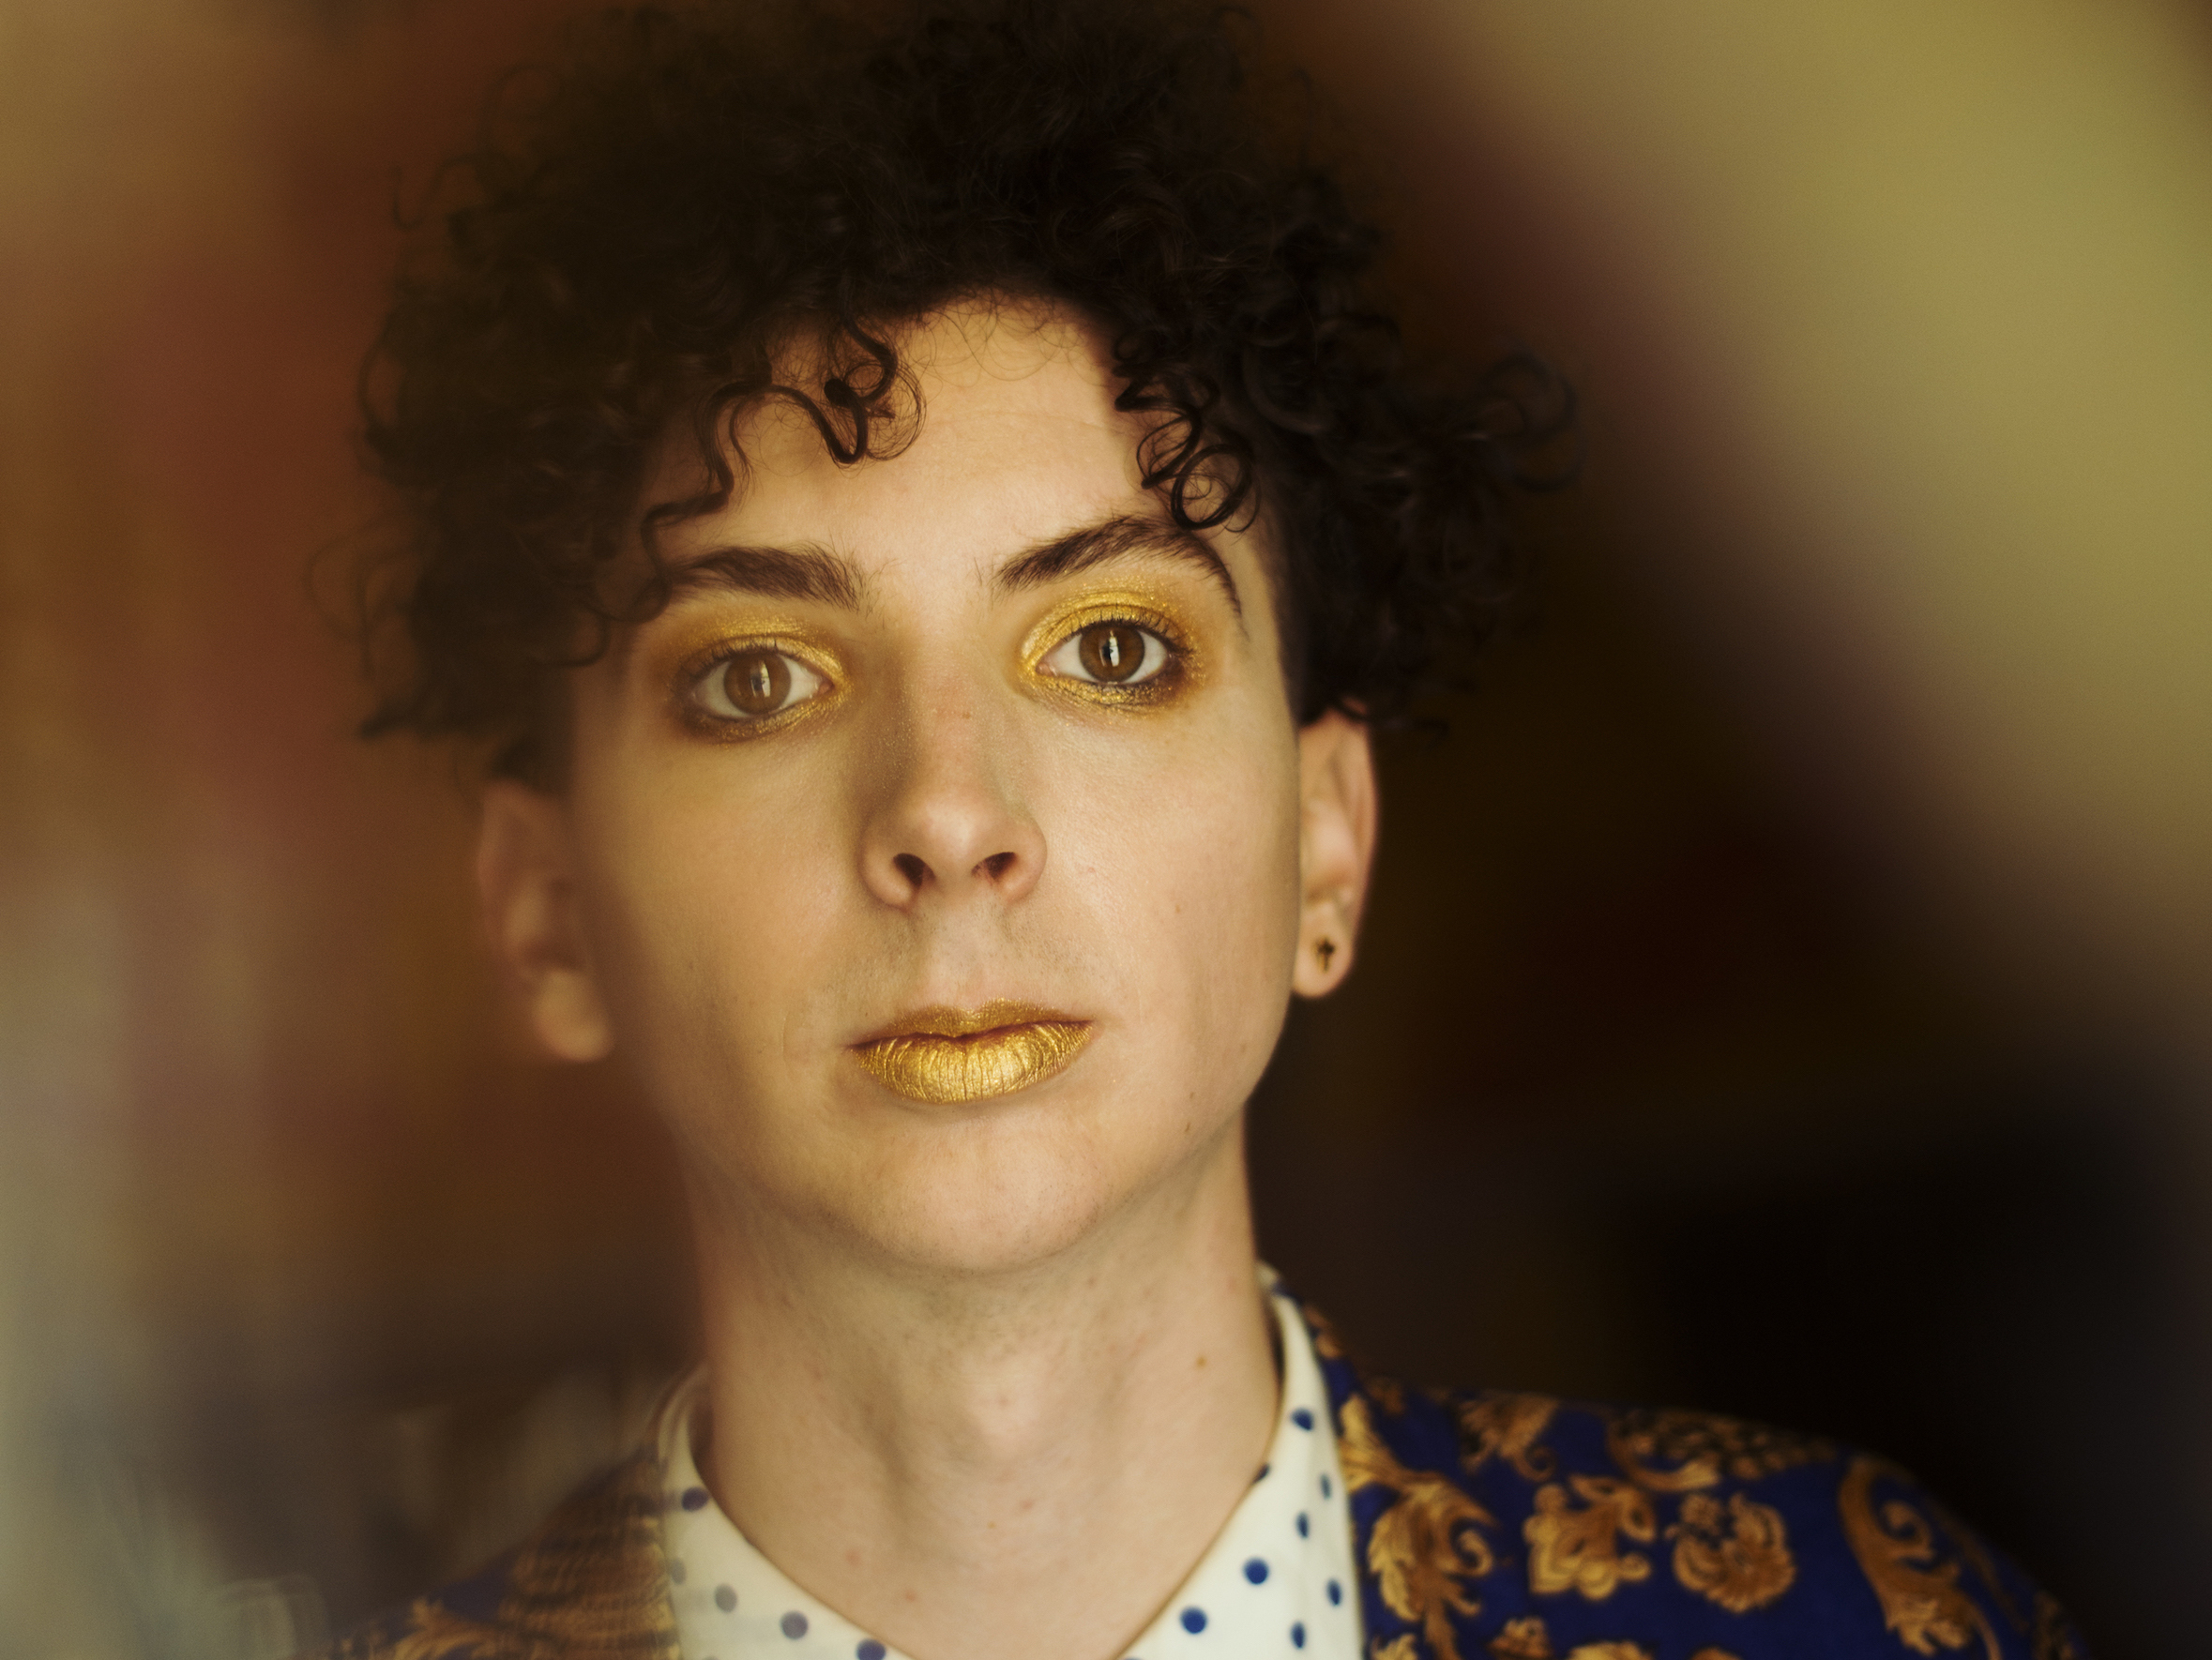 Youth Lagoon's Savage Hills Ballroom is out Sept. 25. (Ken Kaban/Courtesy of the artist)